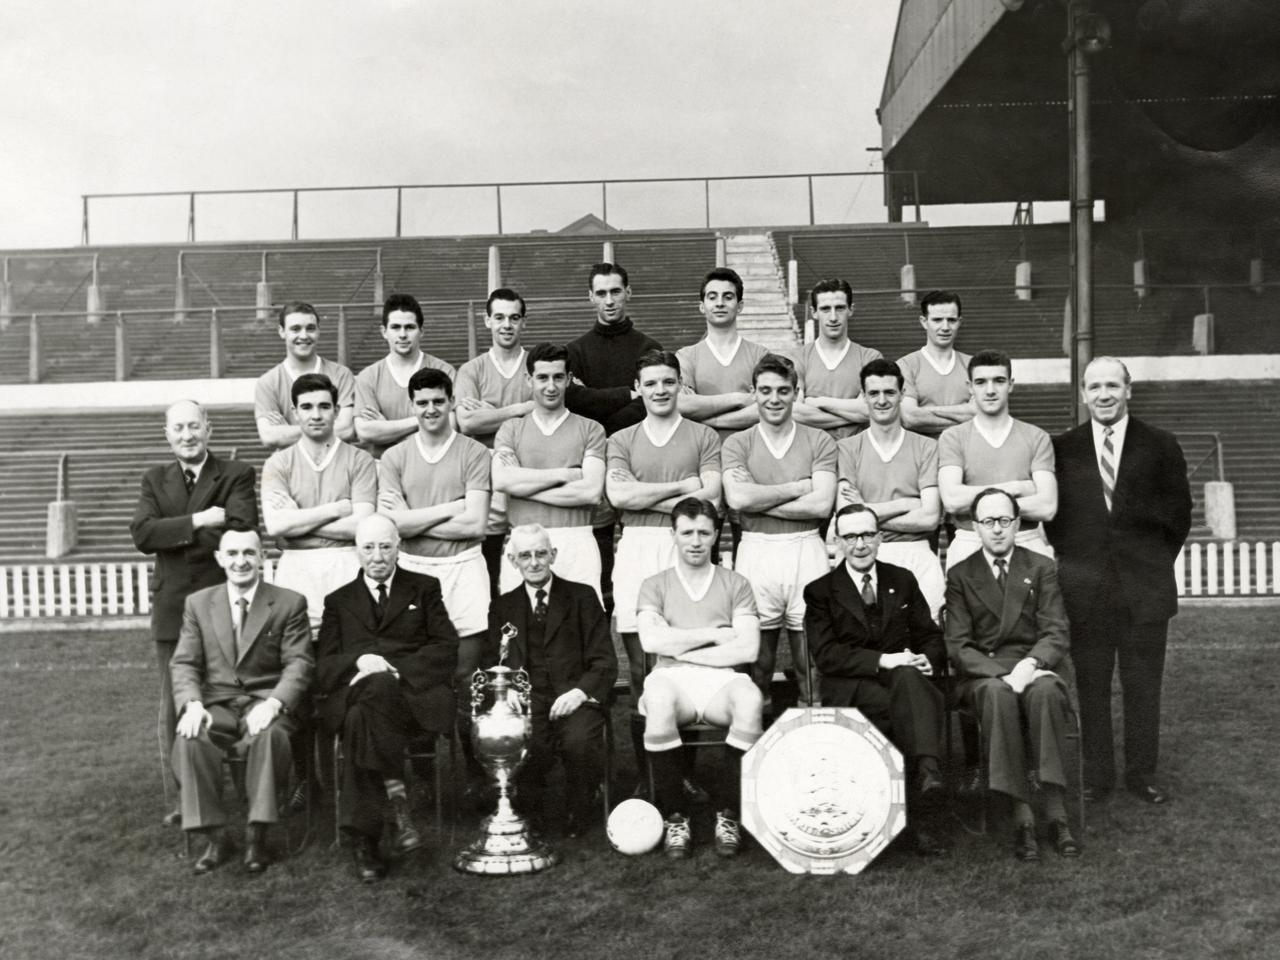 Glory Days: The story of Man Utd's 1956/57 title win | Manchester United